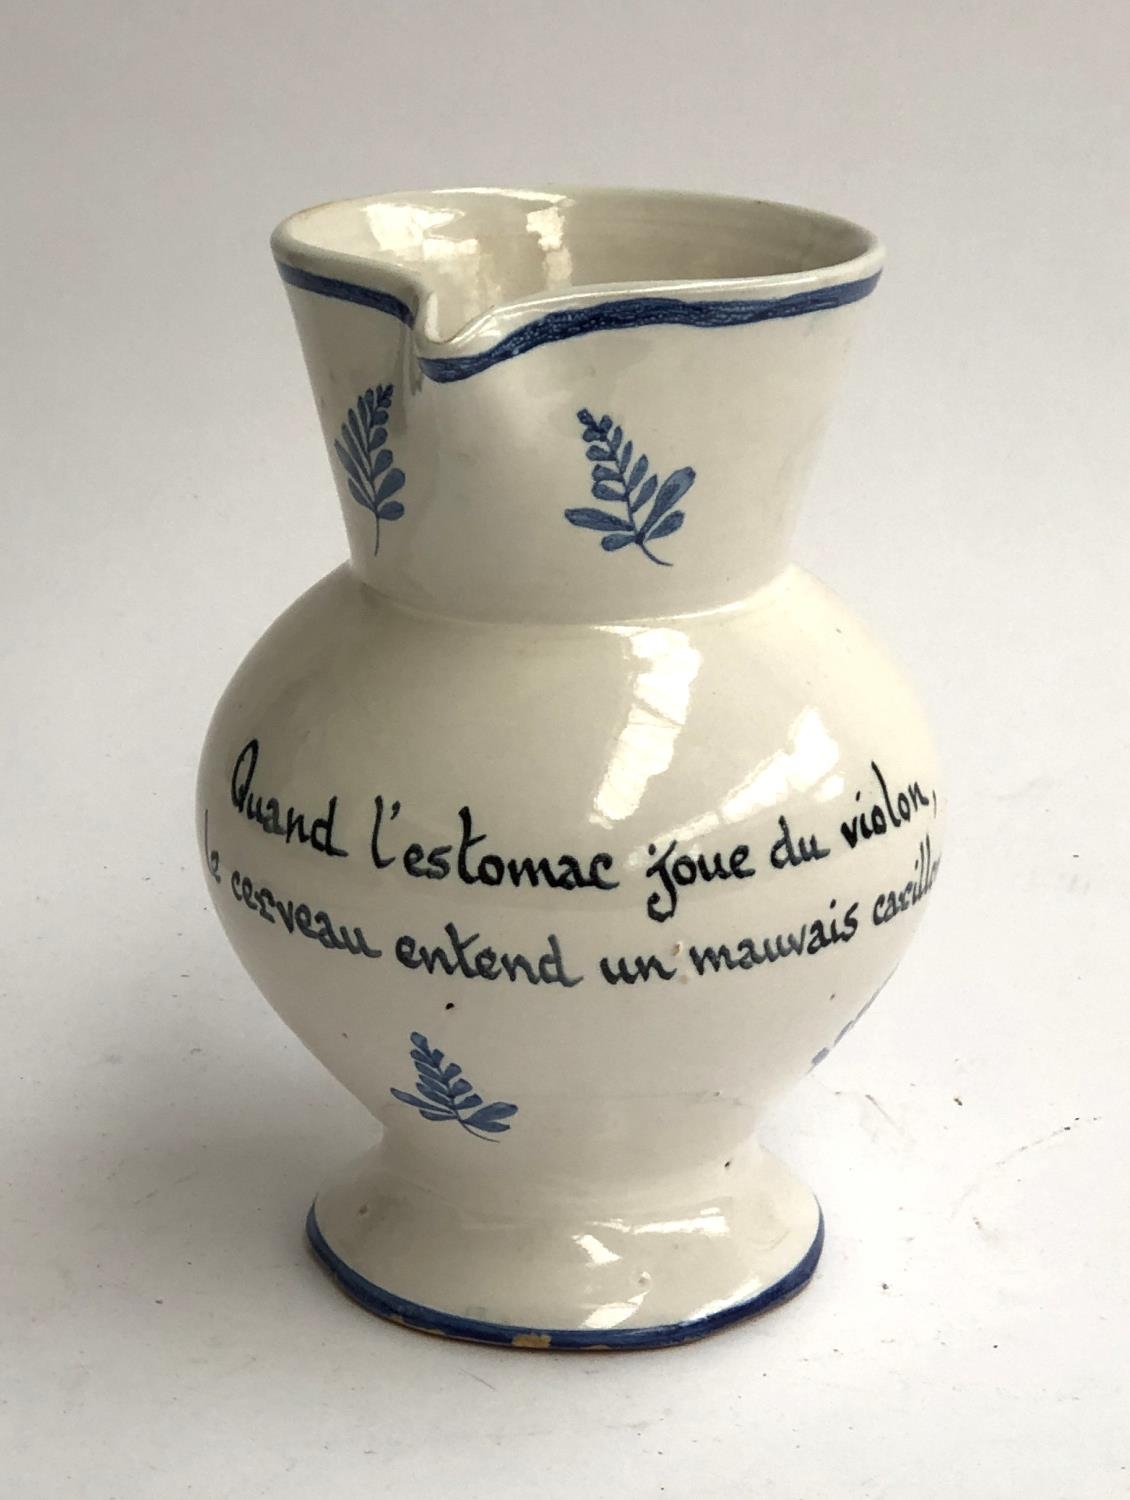 A French faience jug, hand painted with blue floral motifs and the motto 'Quand l'estomac joue du - Image 2 of 2